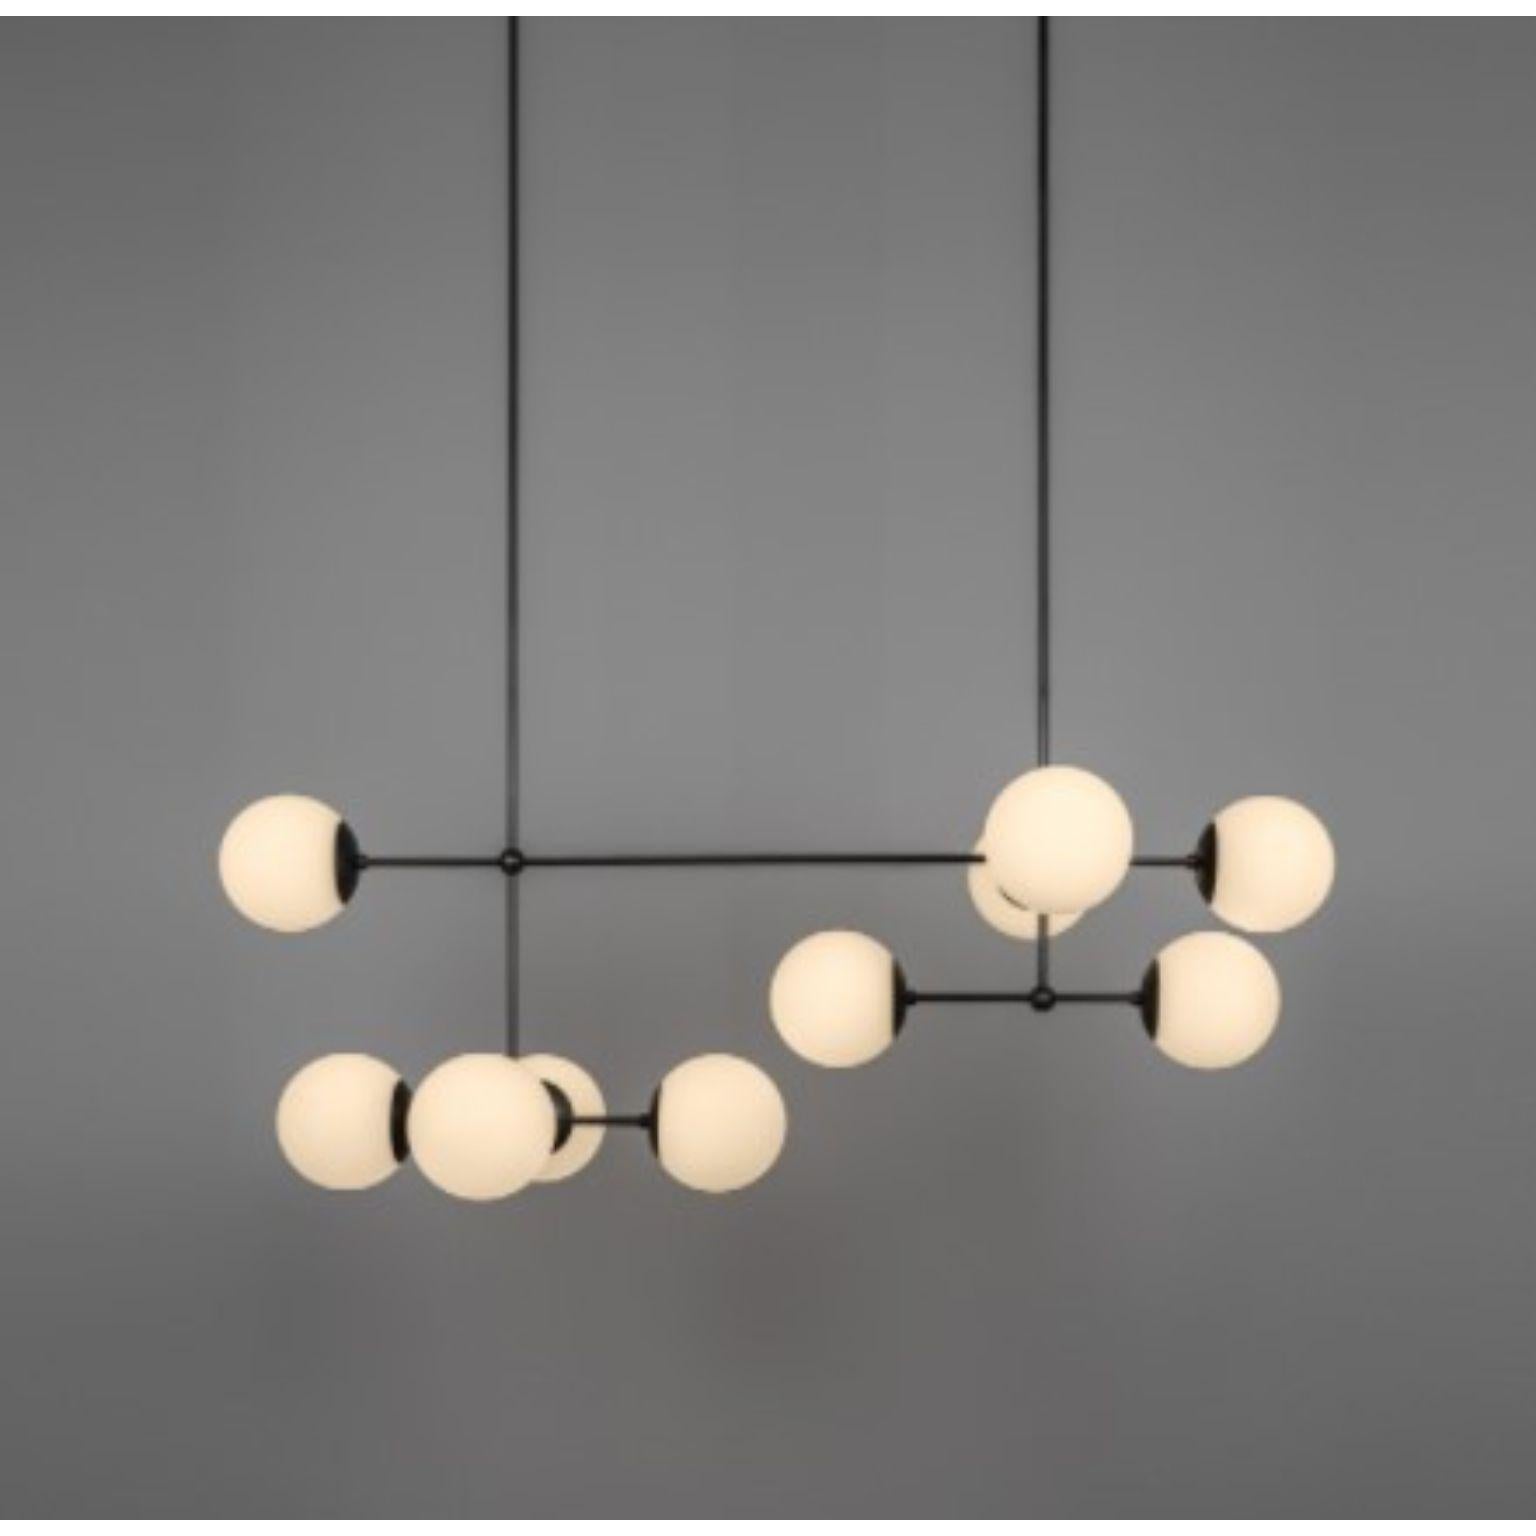 Armstrong linear chandelier by Schwung
Dimensions: D163.5 x H 163 cm
Materials: brass, opal glass
Weight: 16.8 kg

Finishes available: Black gunmetal, polished nickel, brass
Other sizes available.

 Schwung is a german word, and loosely